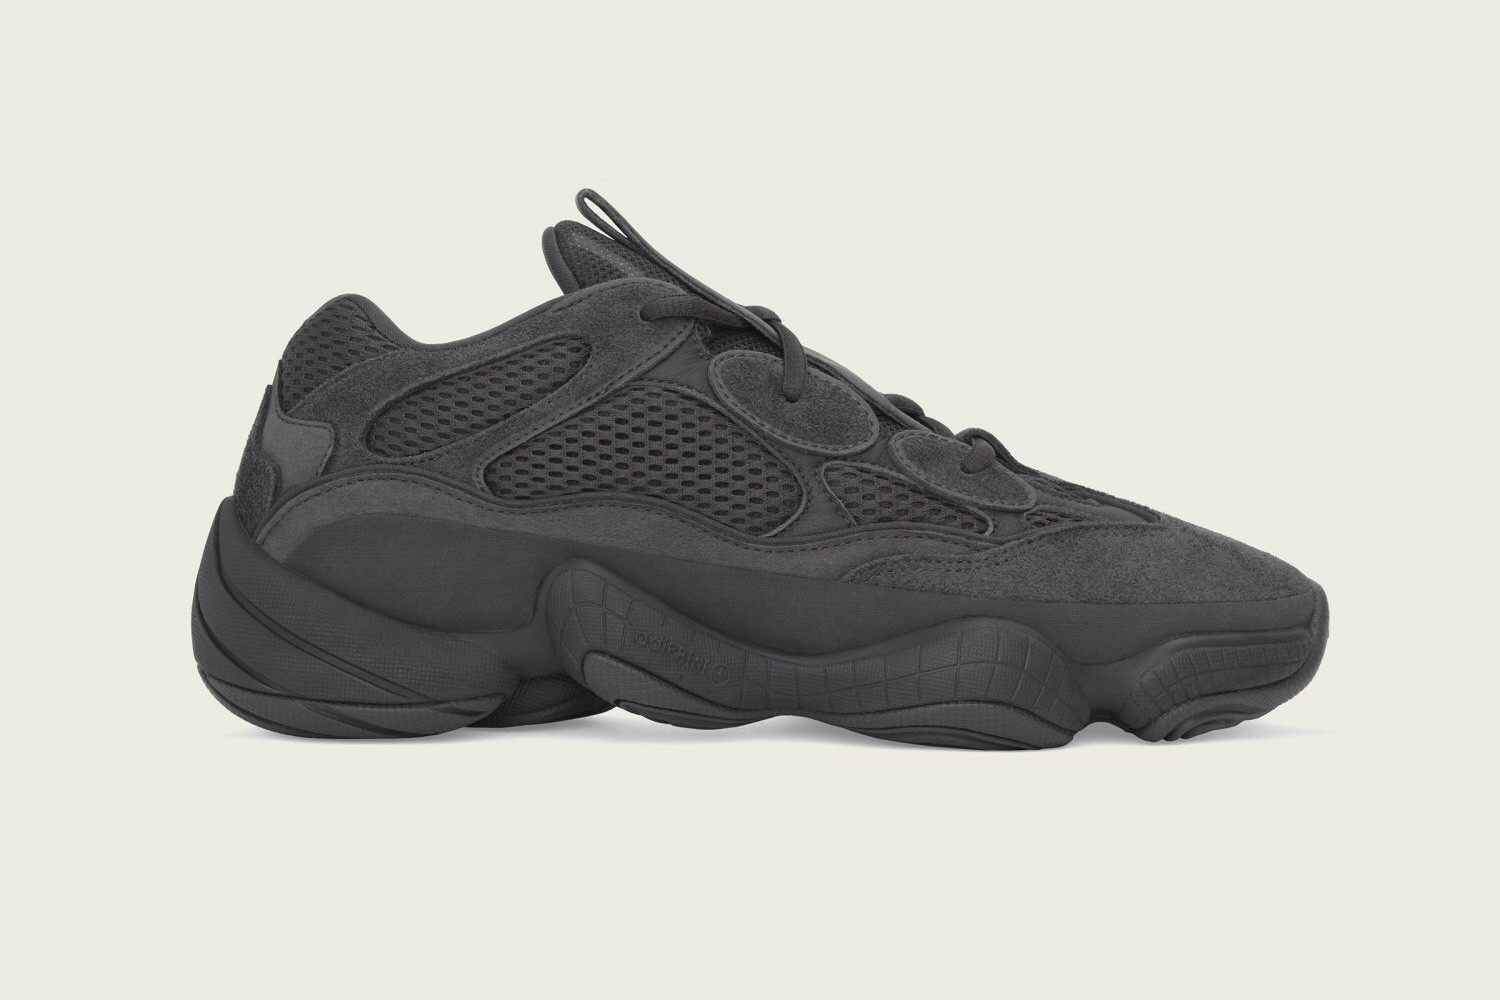 Adidas Yeezy 500 'Utility Black' Sneakers Will Drop On July 7th